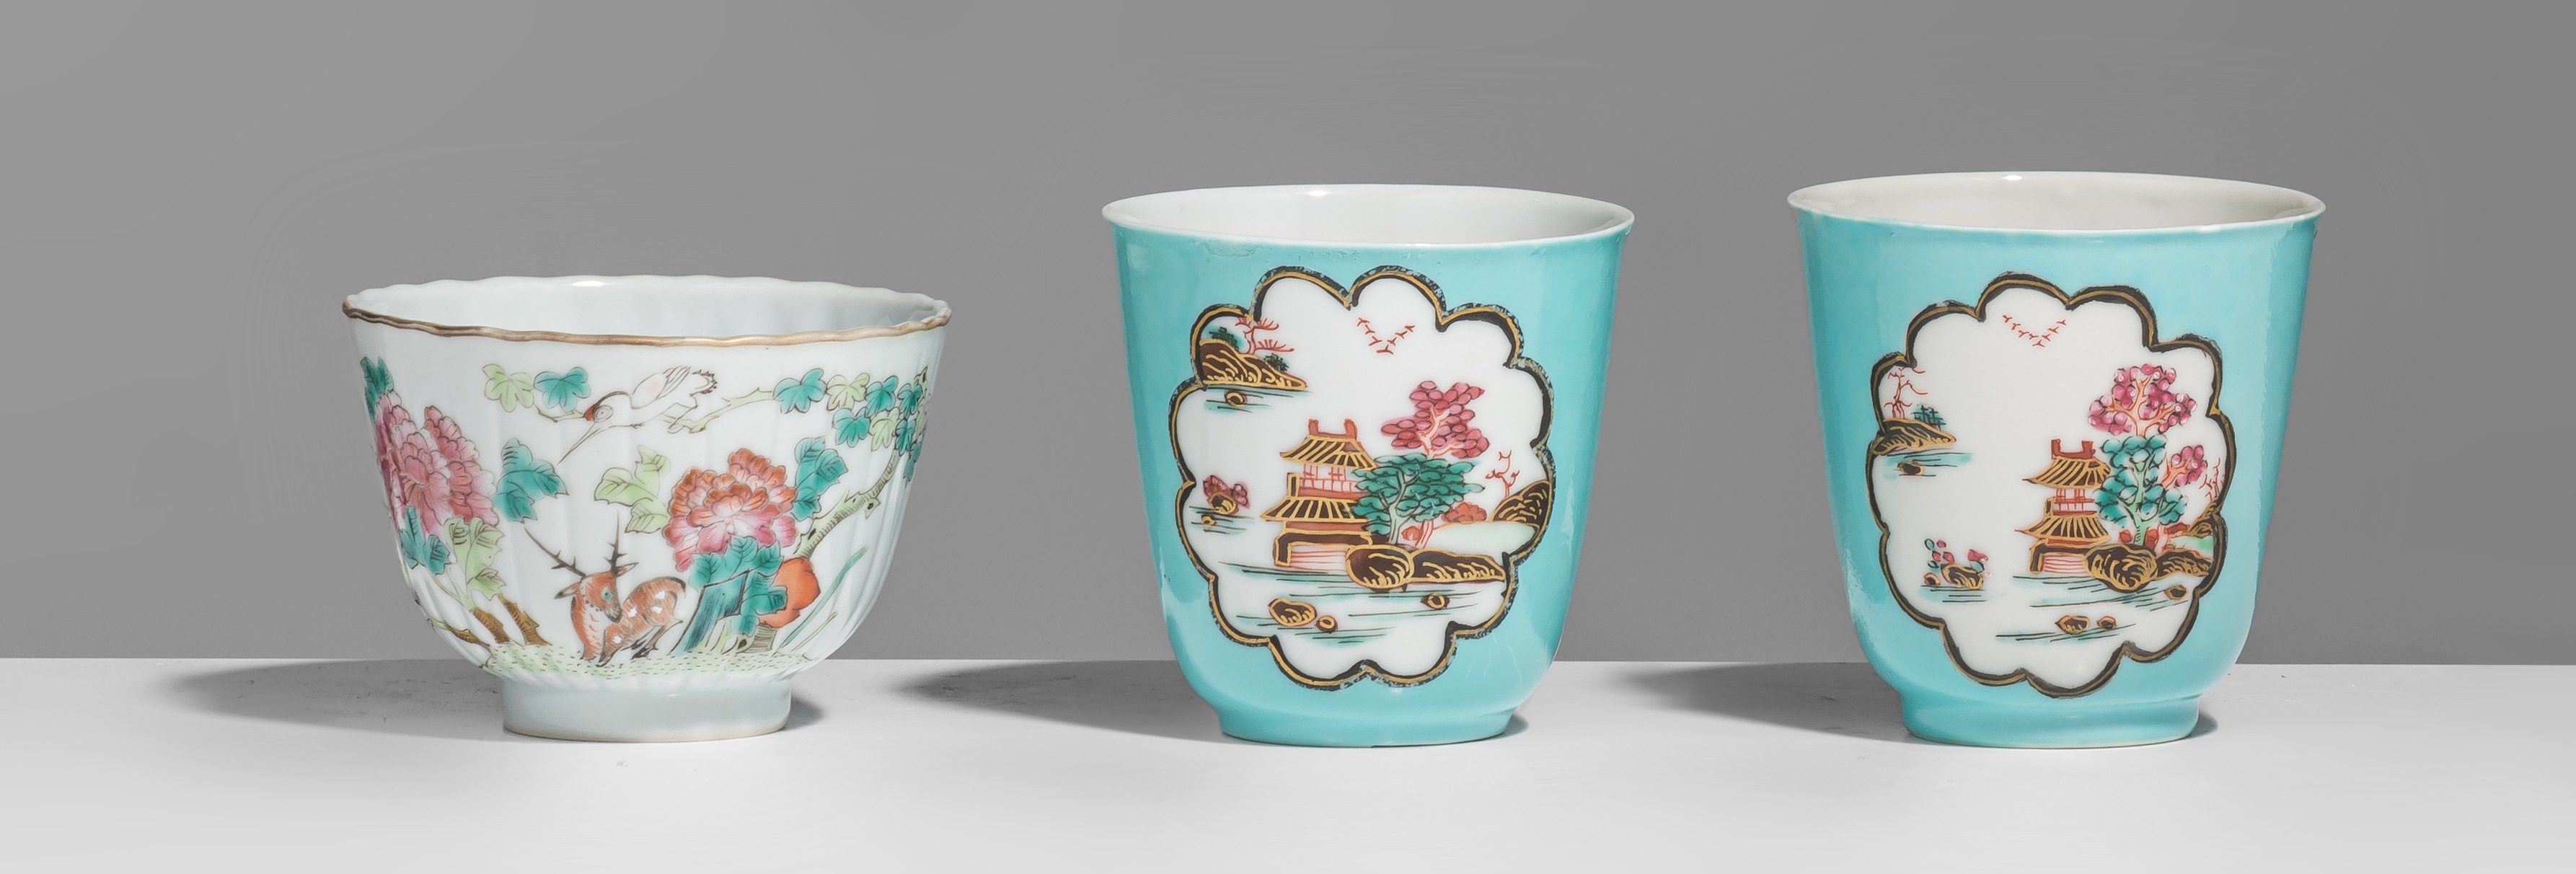 Two rare sets of Meissen-inspired Chinese export porcelain cups and saucers, 18thC, tallest H 7,5 cm - Image 4 of 10